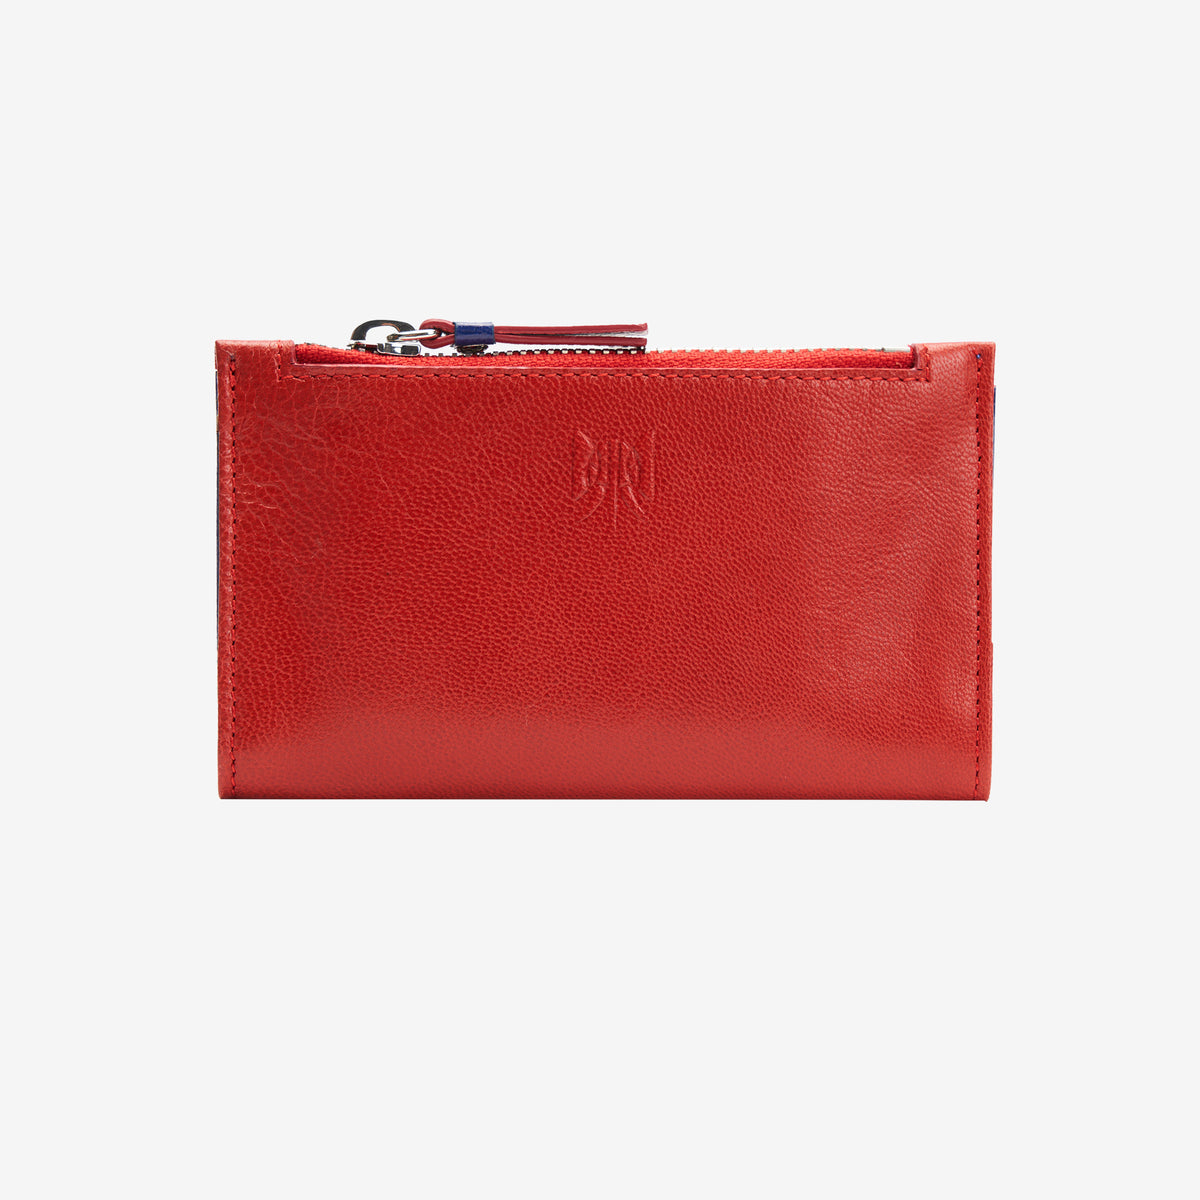       tusk-383-leather-slim-card-case-with-zip-coin-pocket-red-and-marine-front